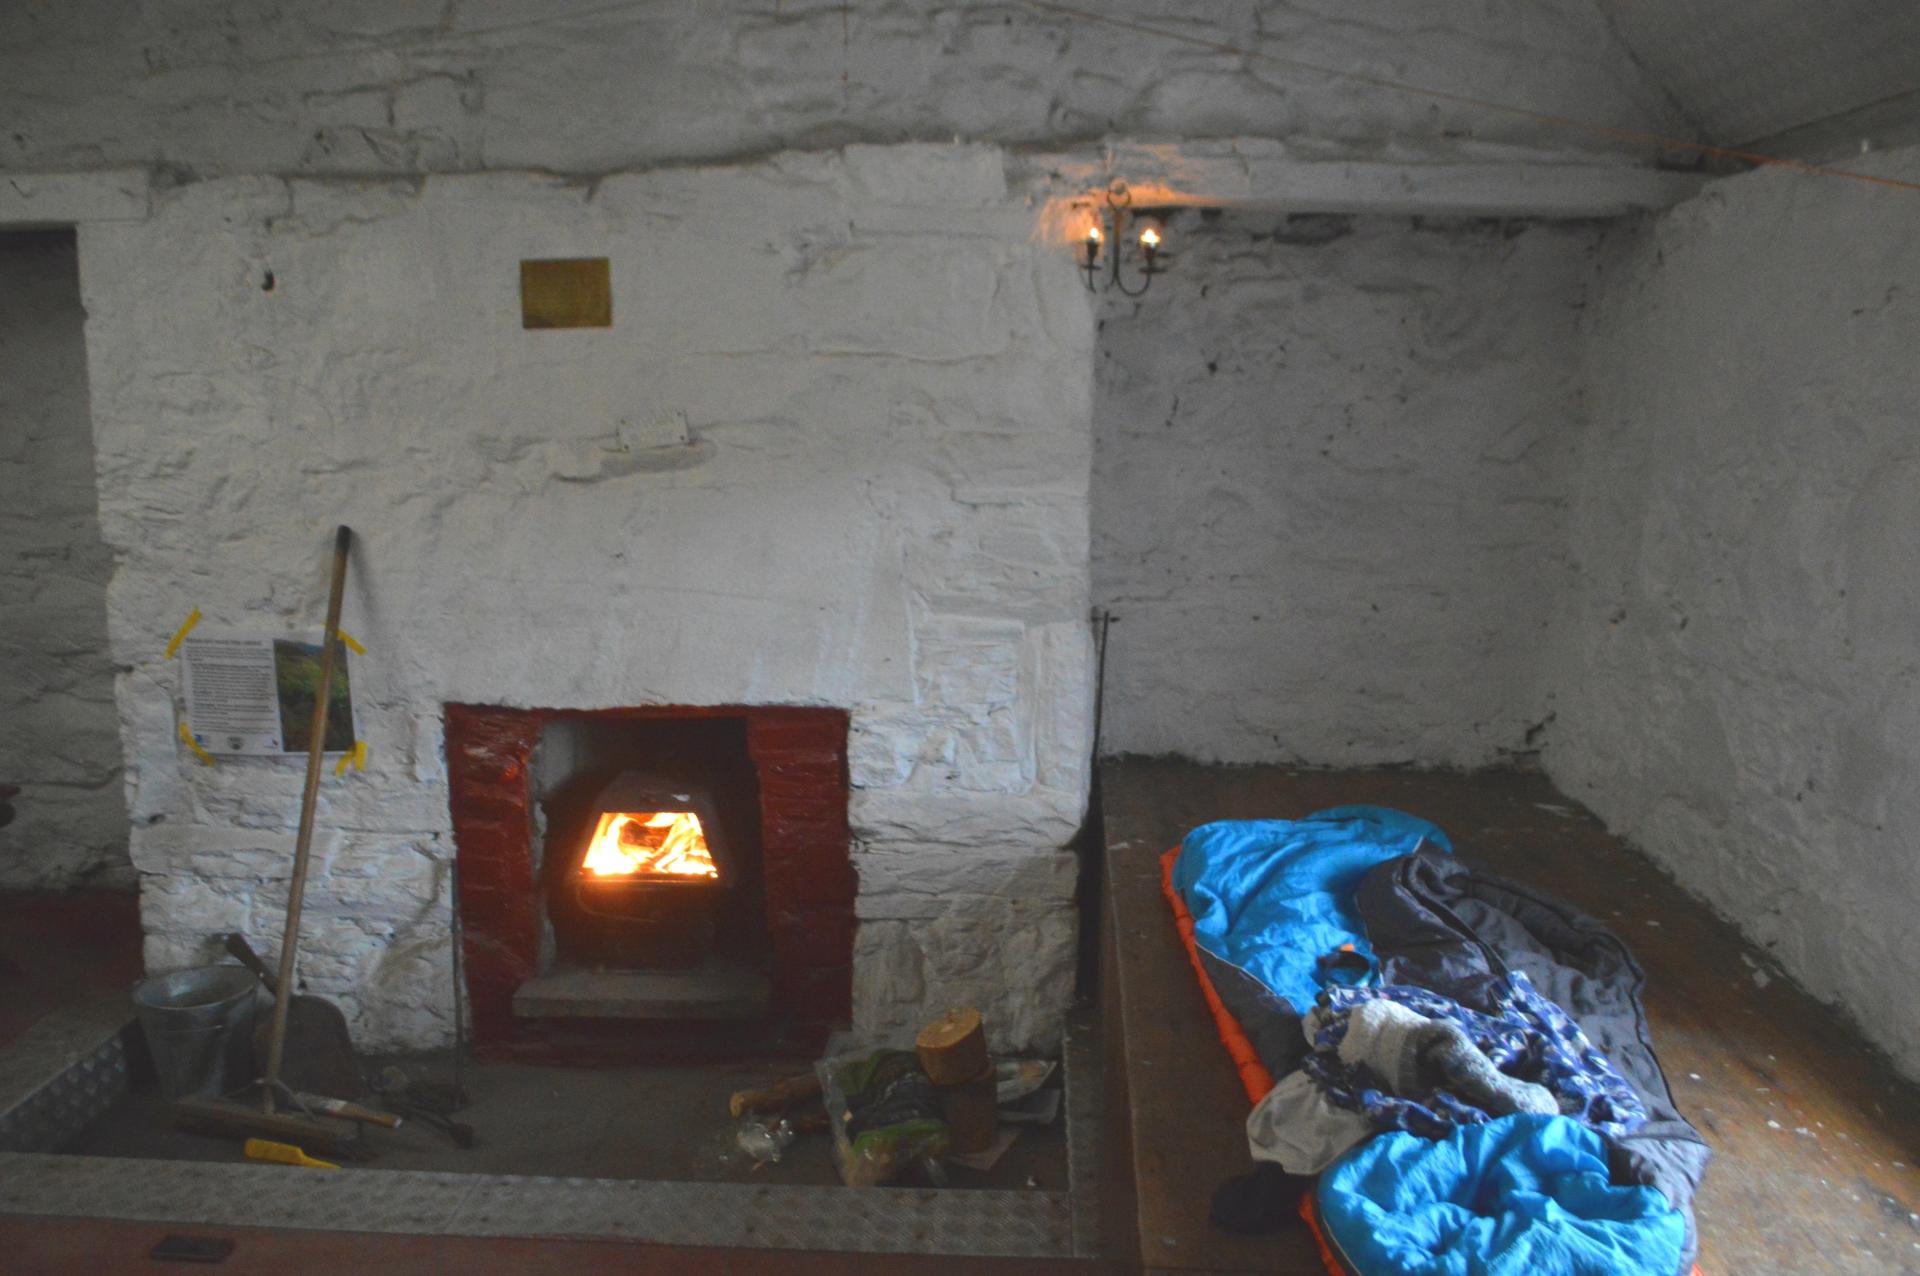 Scottish bothy walk - Ryvoan perfect beginner's bothy in the Highlands